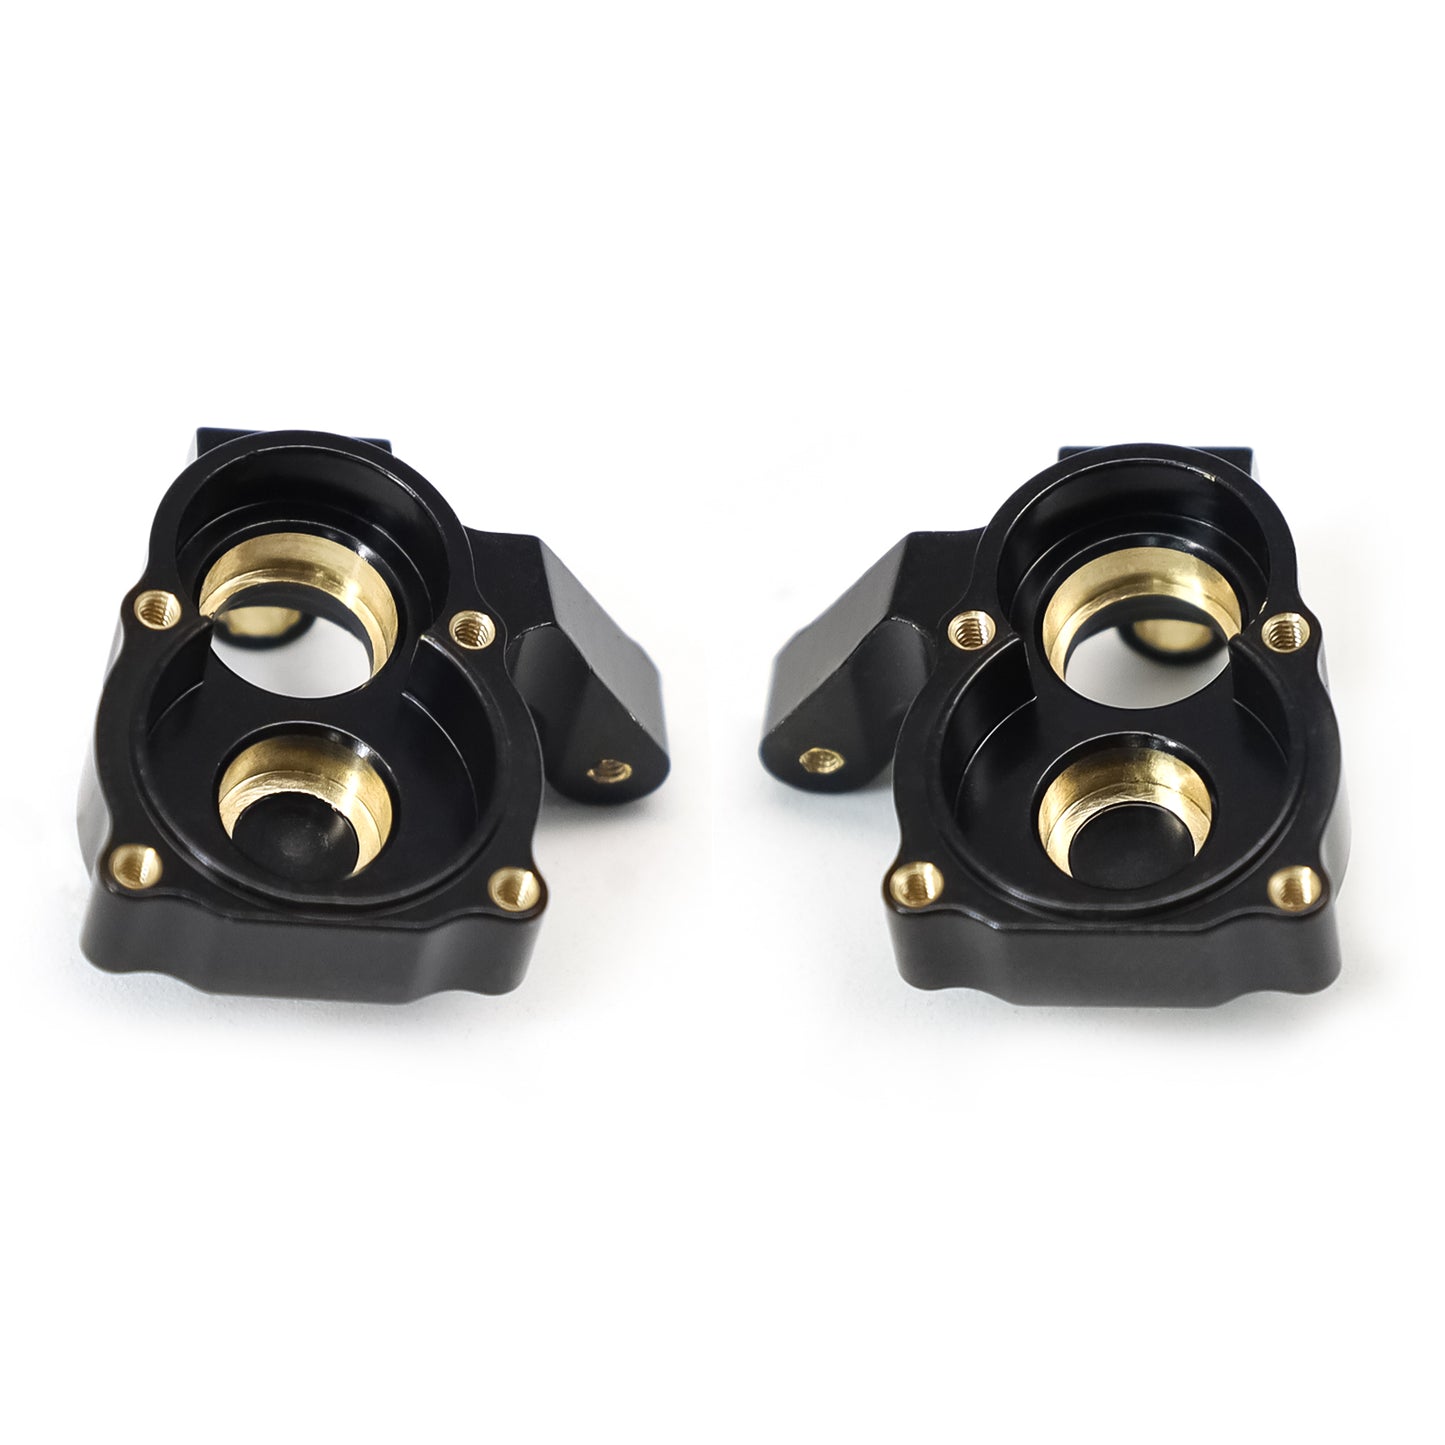 TREAL SCX24 Brass Inner Portal Covers(2P) Front Steering Knuckles 11g for Portal Axles-Black